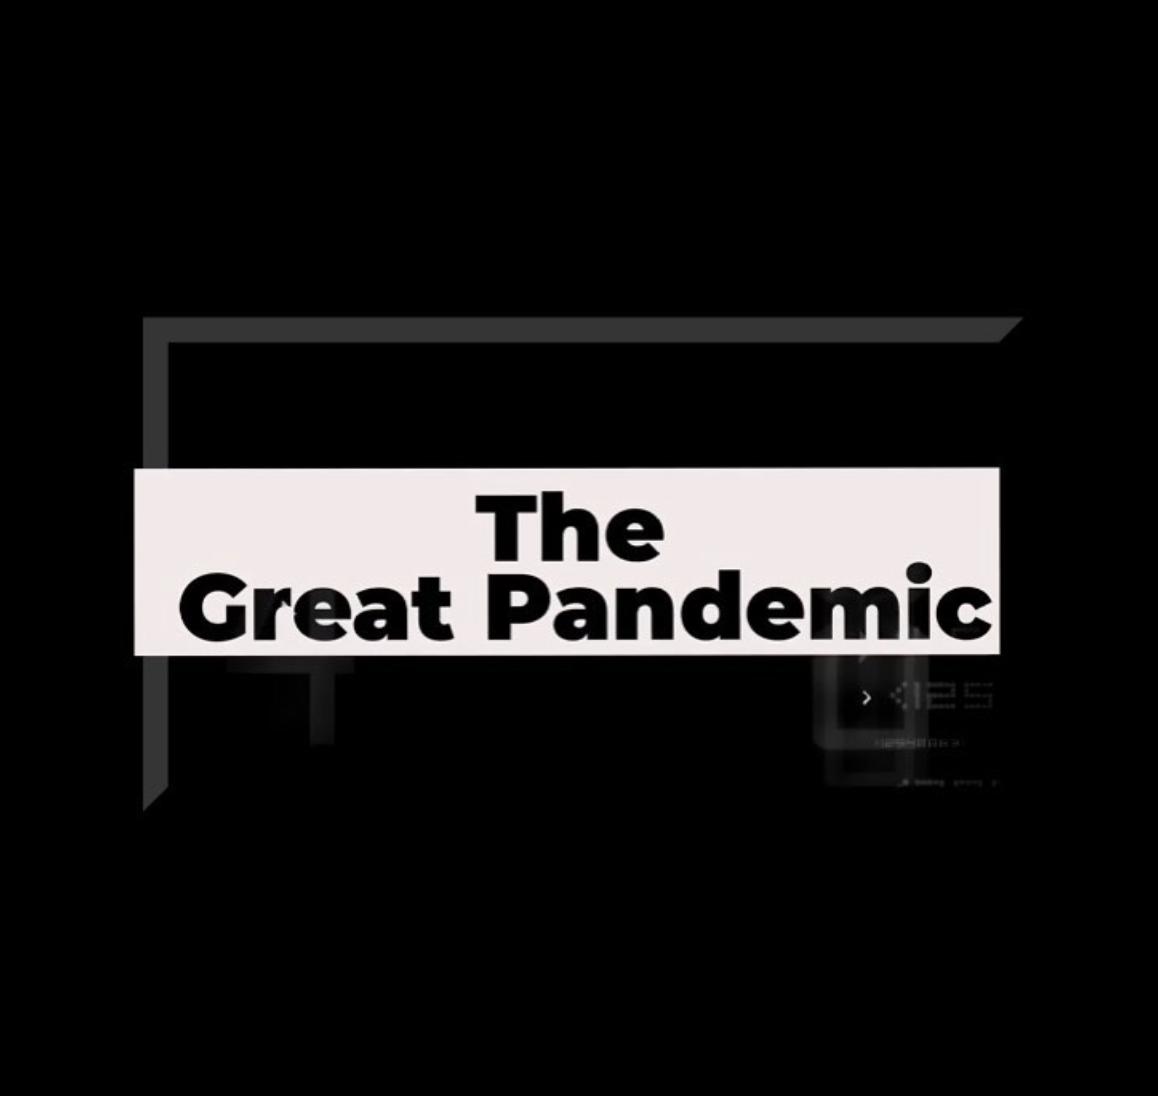 The Great Pandemic